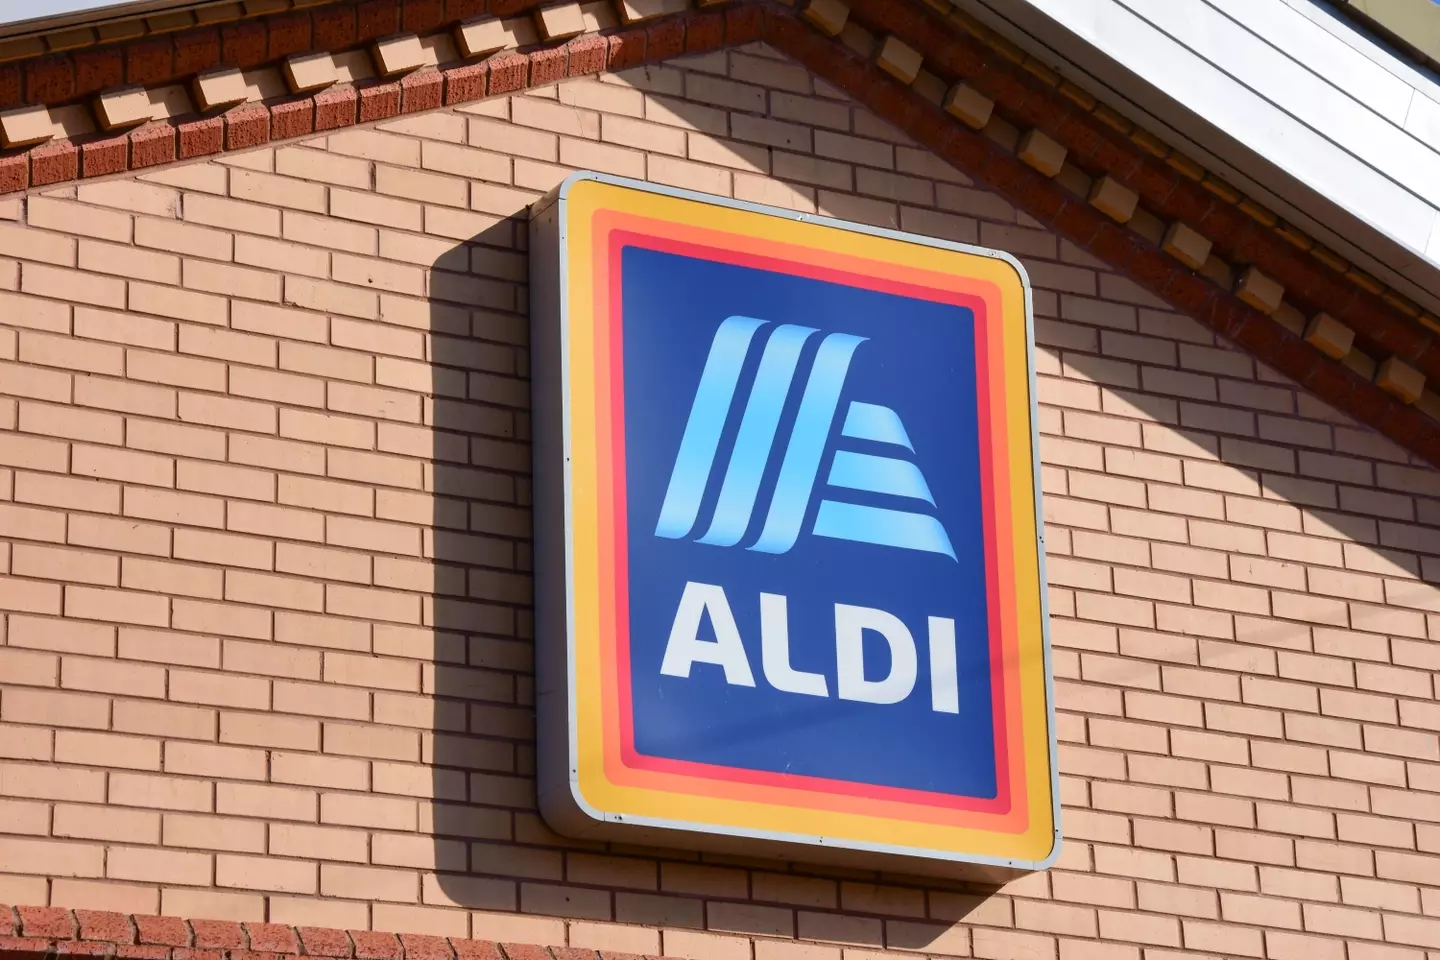 Guests will be treated to Aldi food at the ceremony.